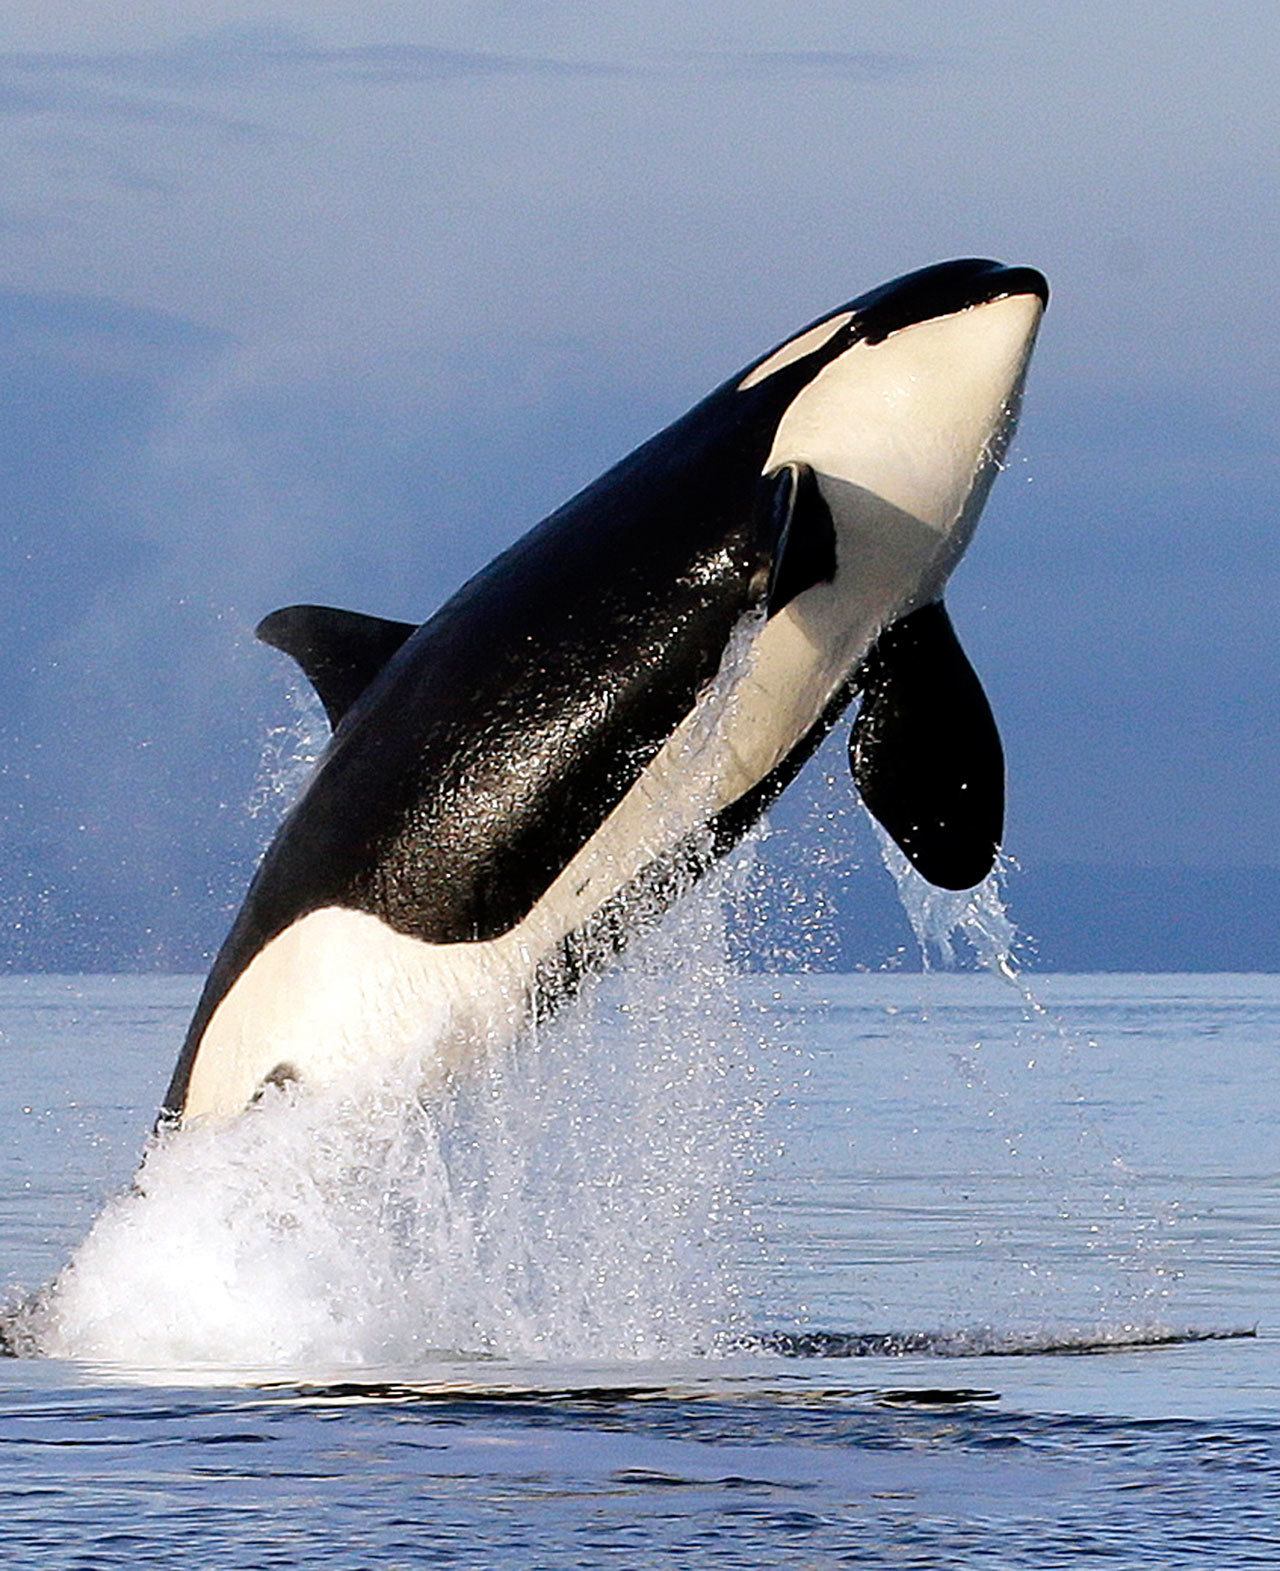 A female orca leaps from the water while breaching in Puget Sound west of Seattle, as seen from a federal research vessel that has been tracking the whale, in January 2014. (Elaine Thompson/The Associated Press)